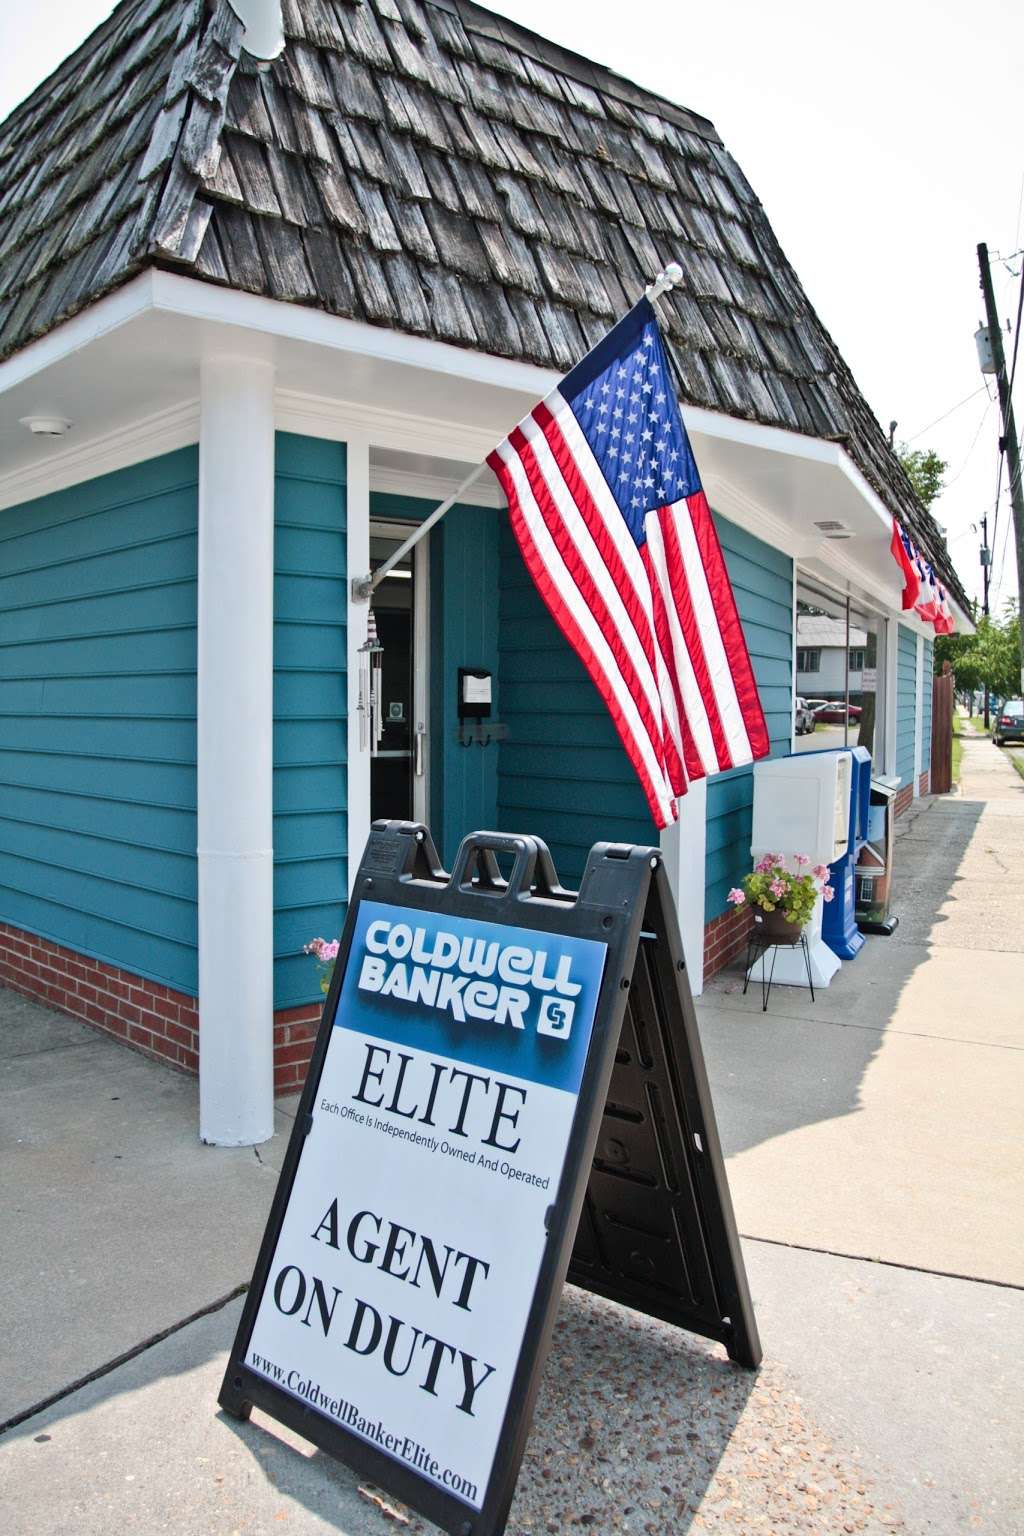 Coldwell Banker Elite Real Estate Company Colonial Beach Office | 233 N Irving Ave, Colonial Beach, VA 22443 | Phone: (804) 224-3501